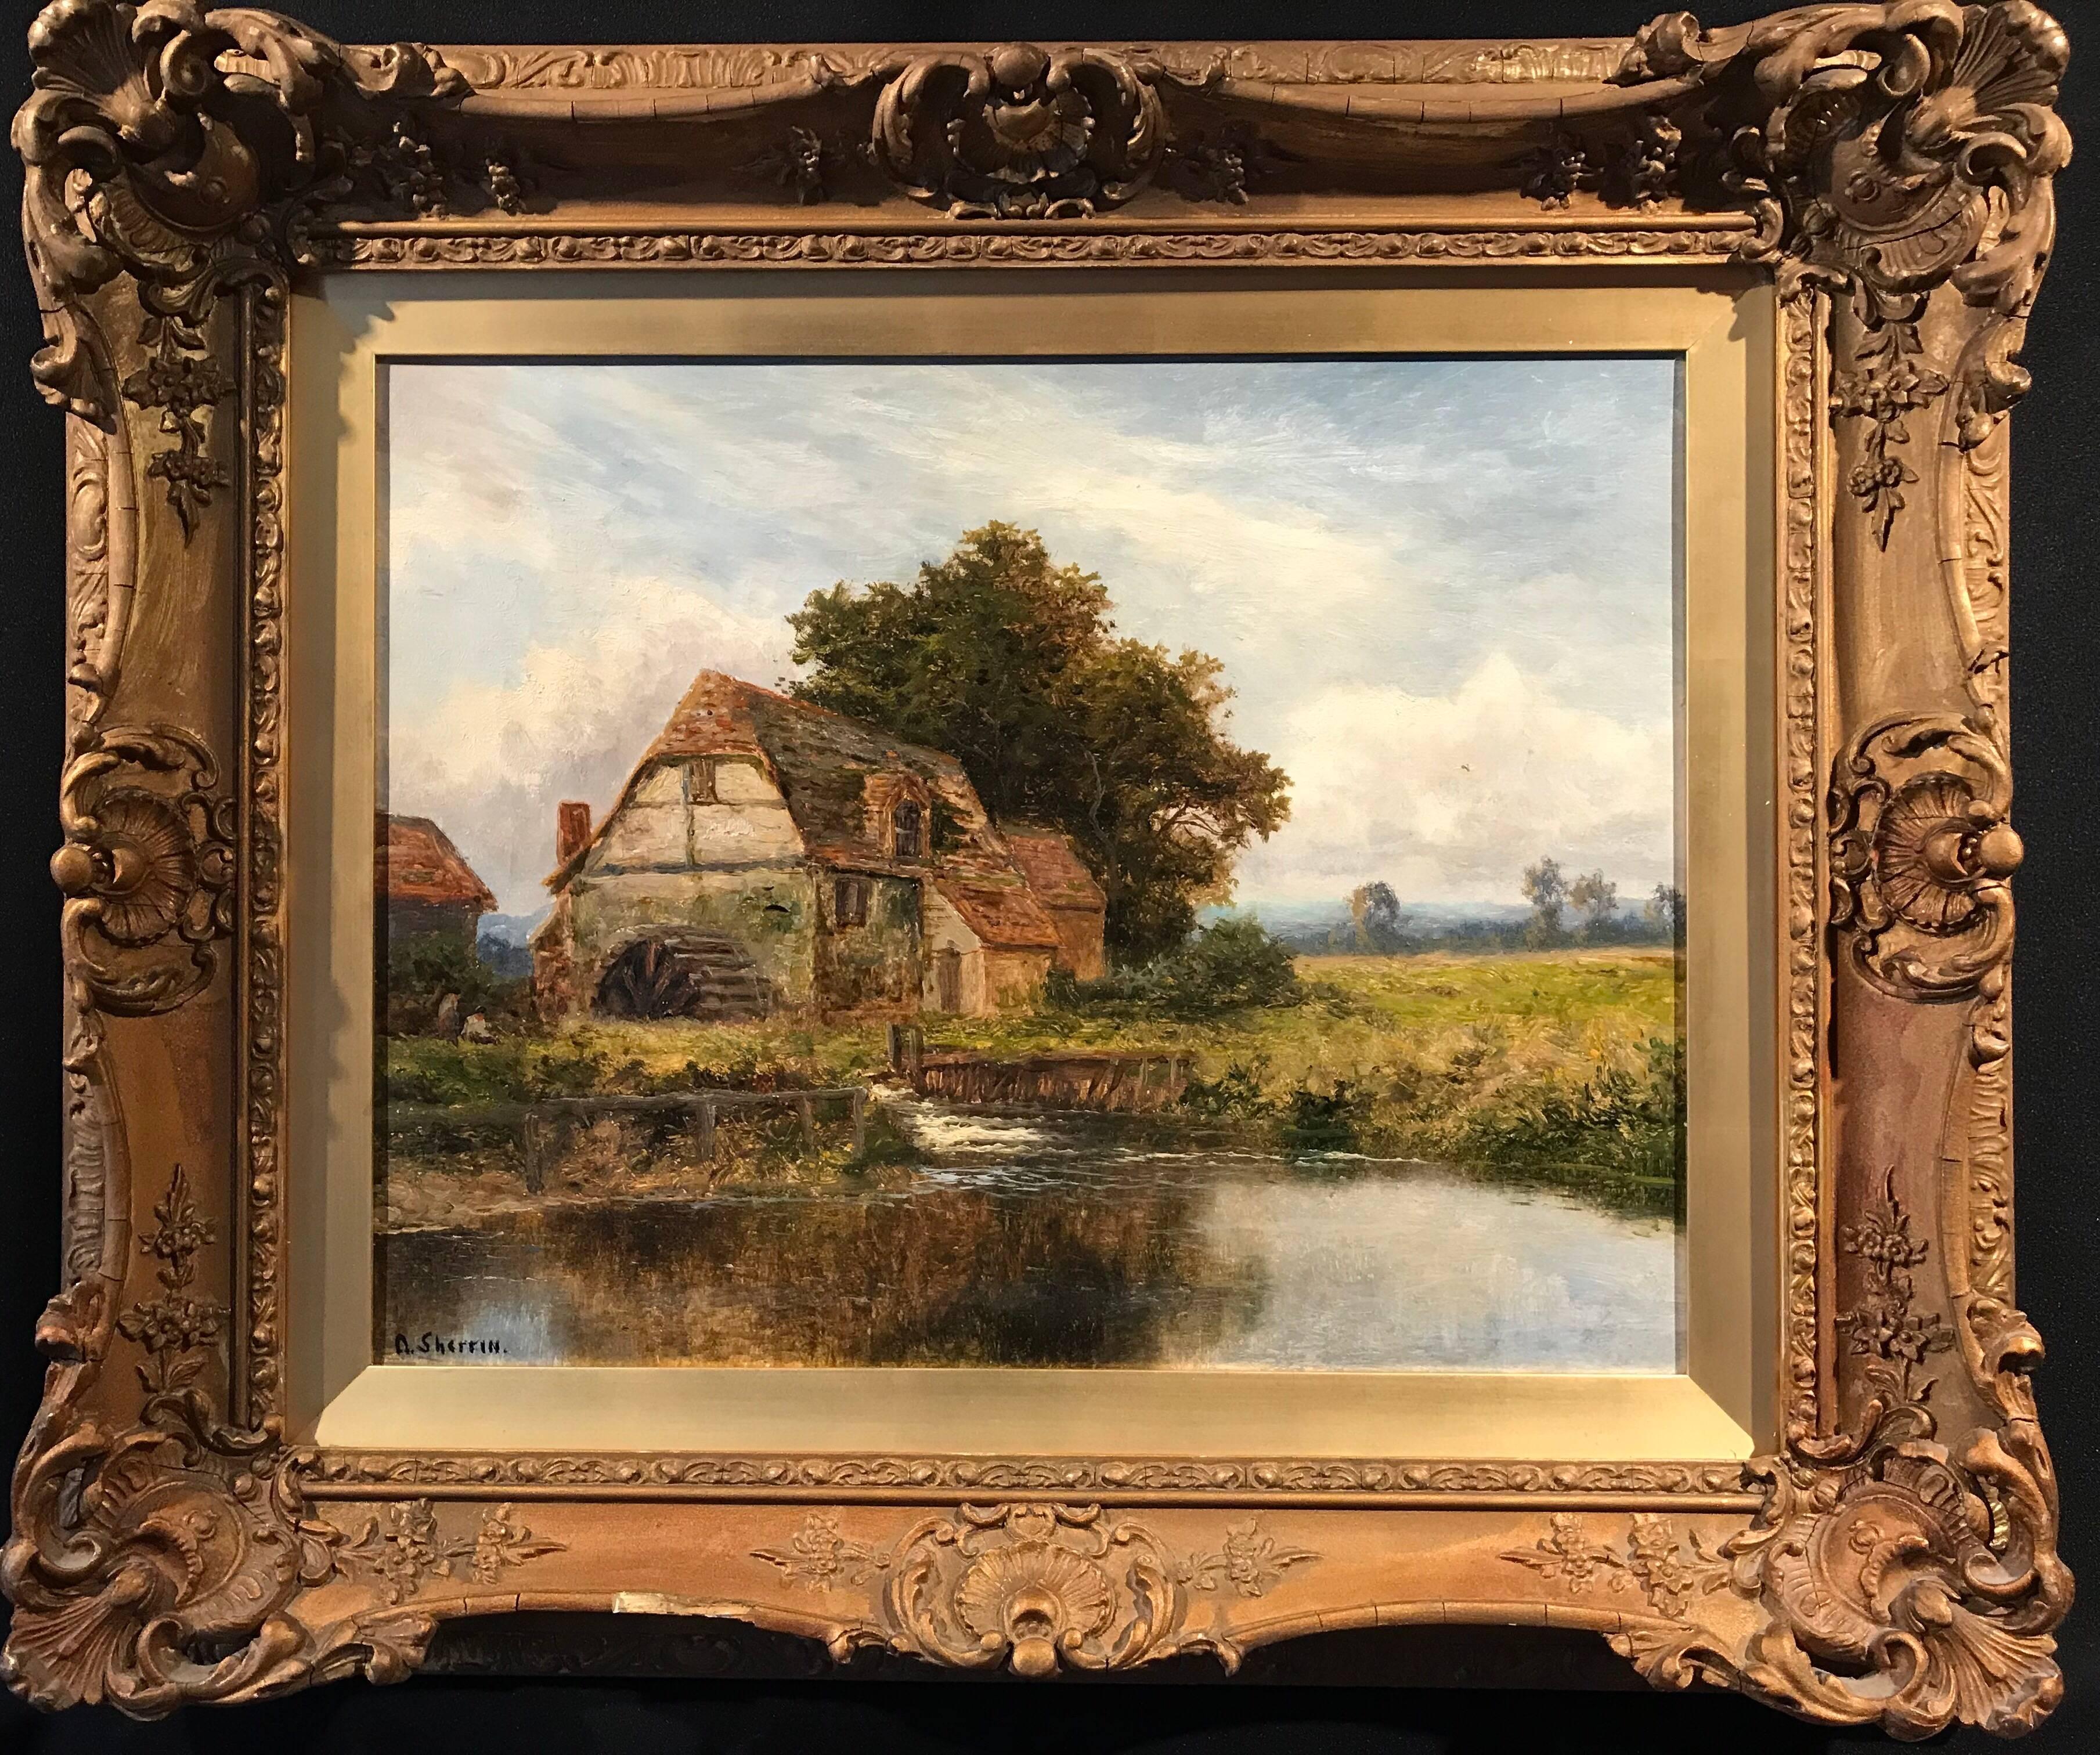 Daniel Sherrin Landscape Painting - The Old Watermill, signed English oil painting